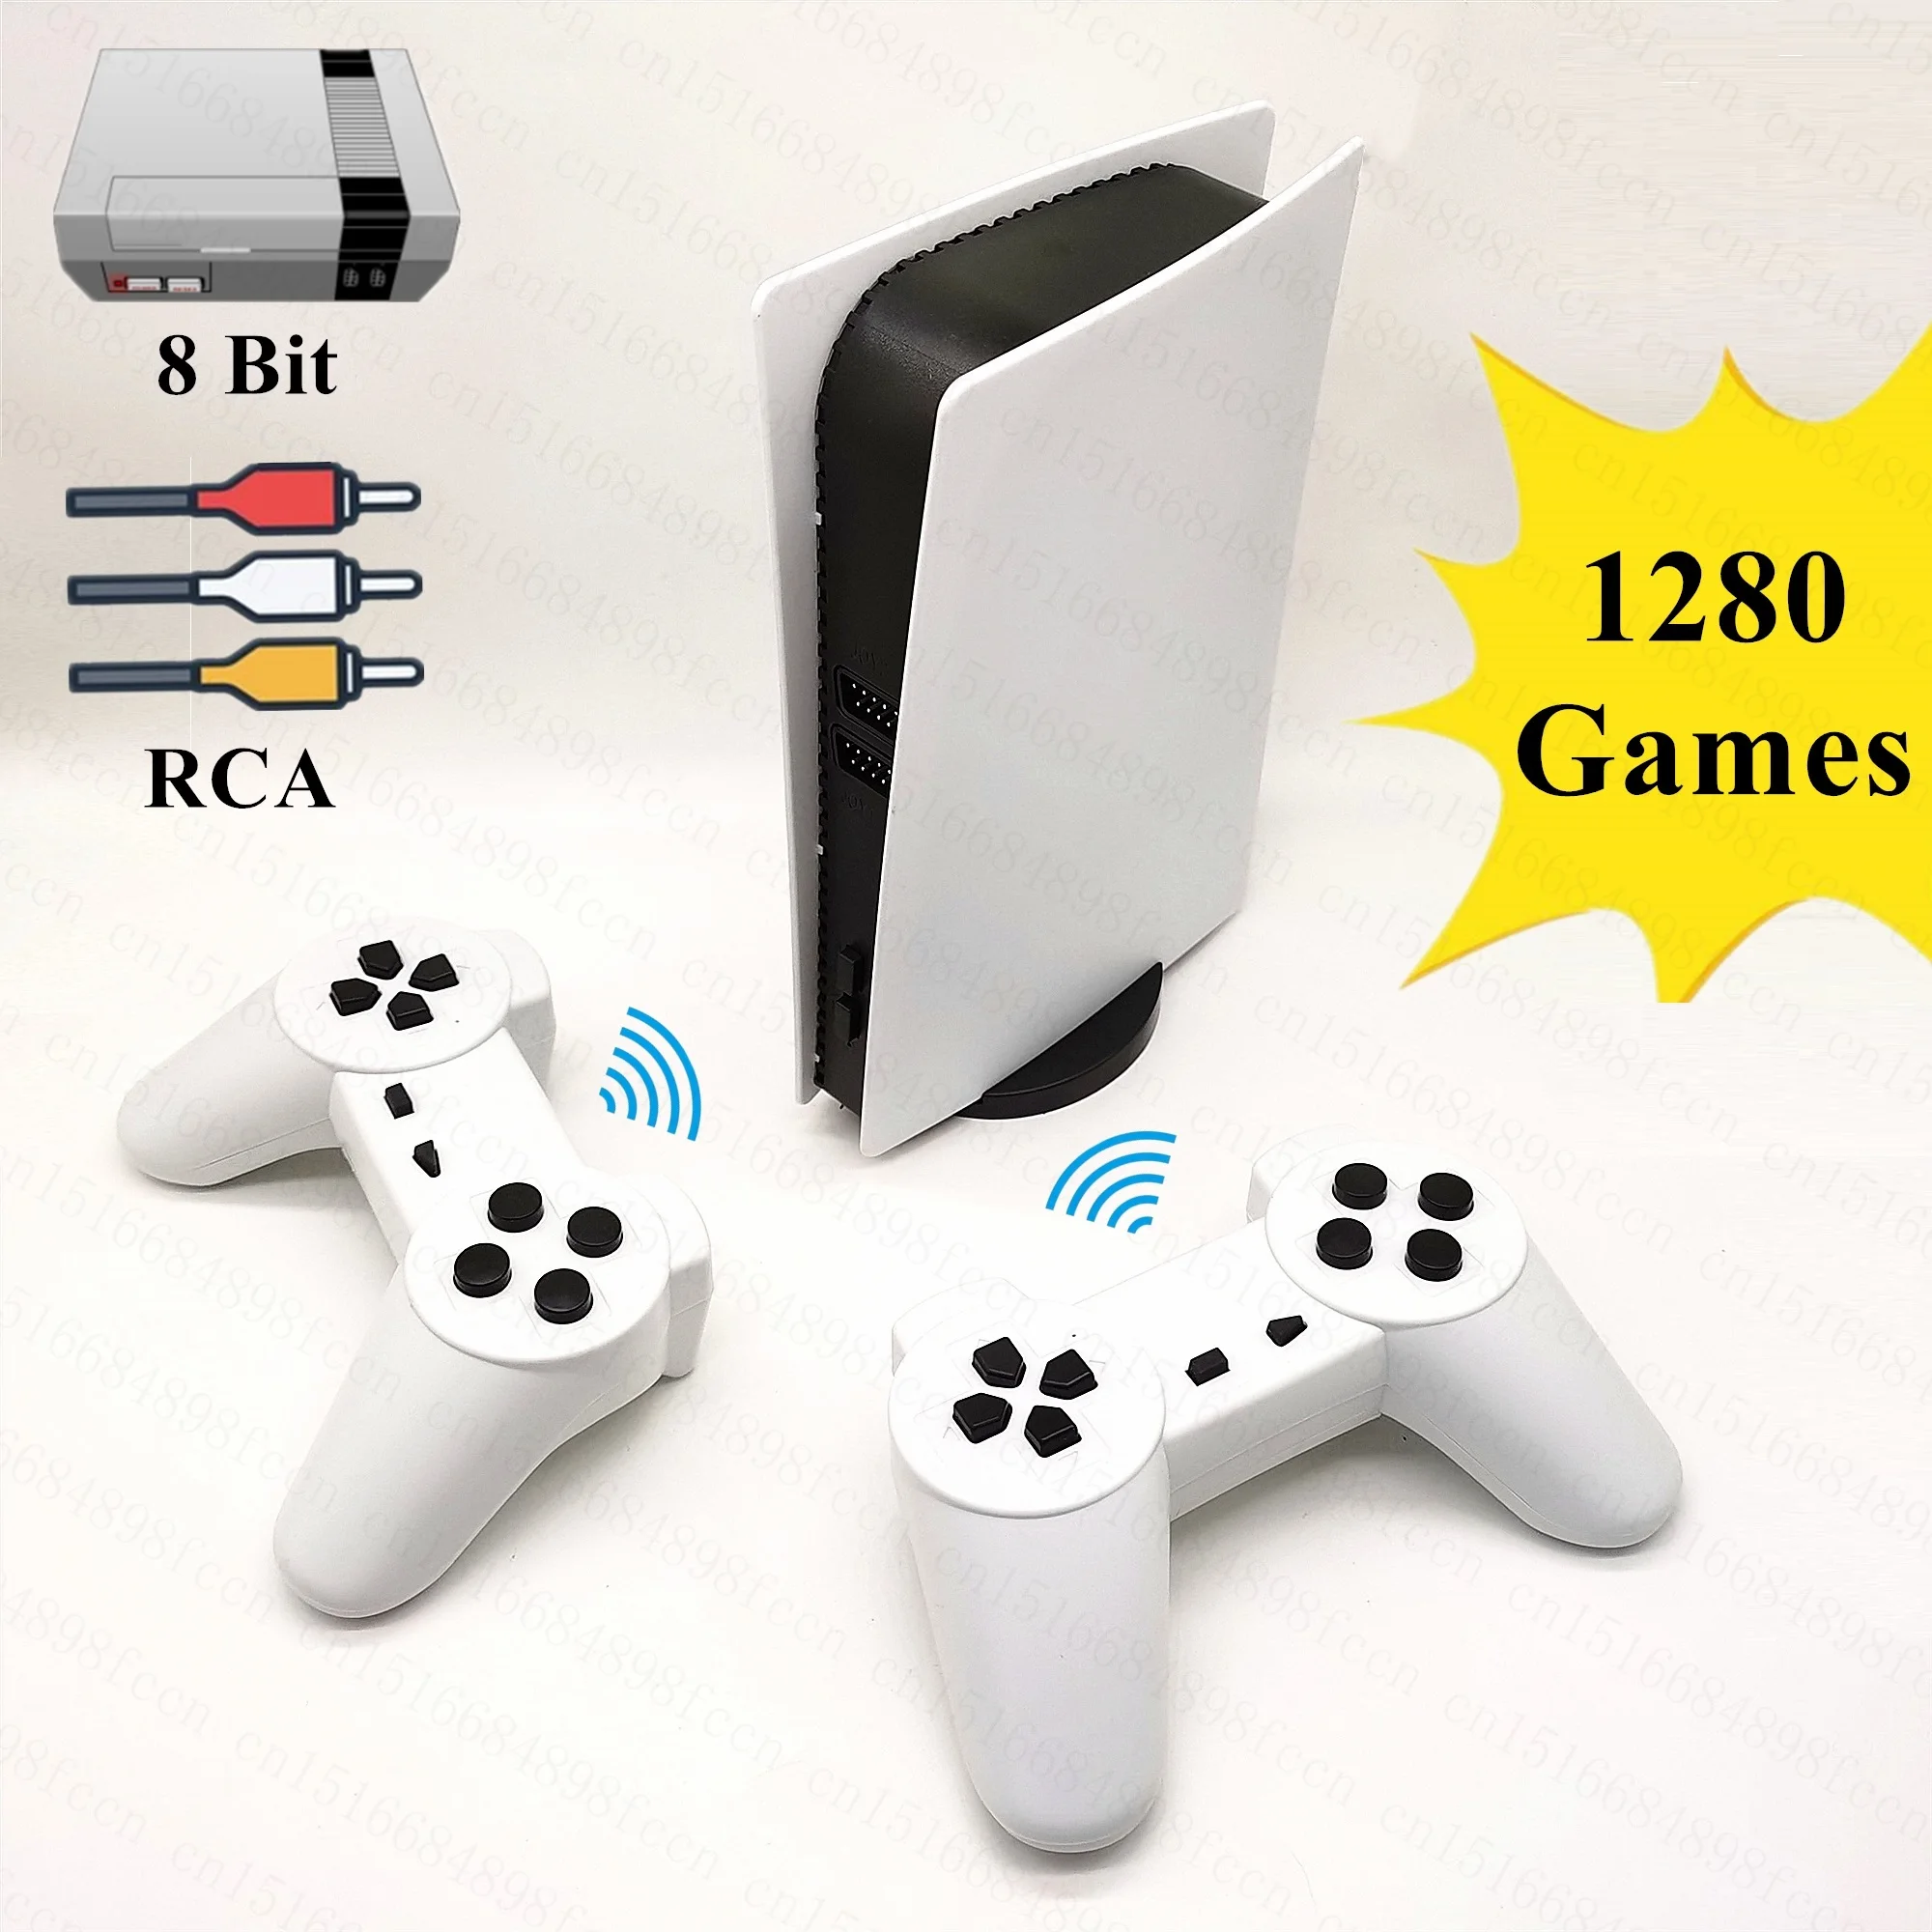 

Mini P5 Retro Wilreless TV Video Game Console Player For Nes 8 Bit Games with 1280 Different Built-in Games Double Gamepads